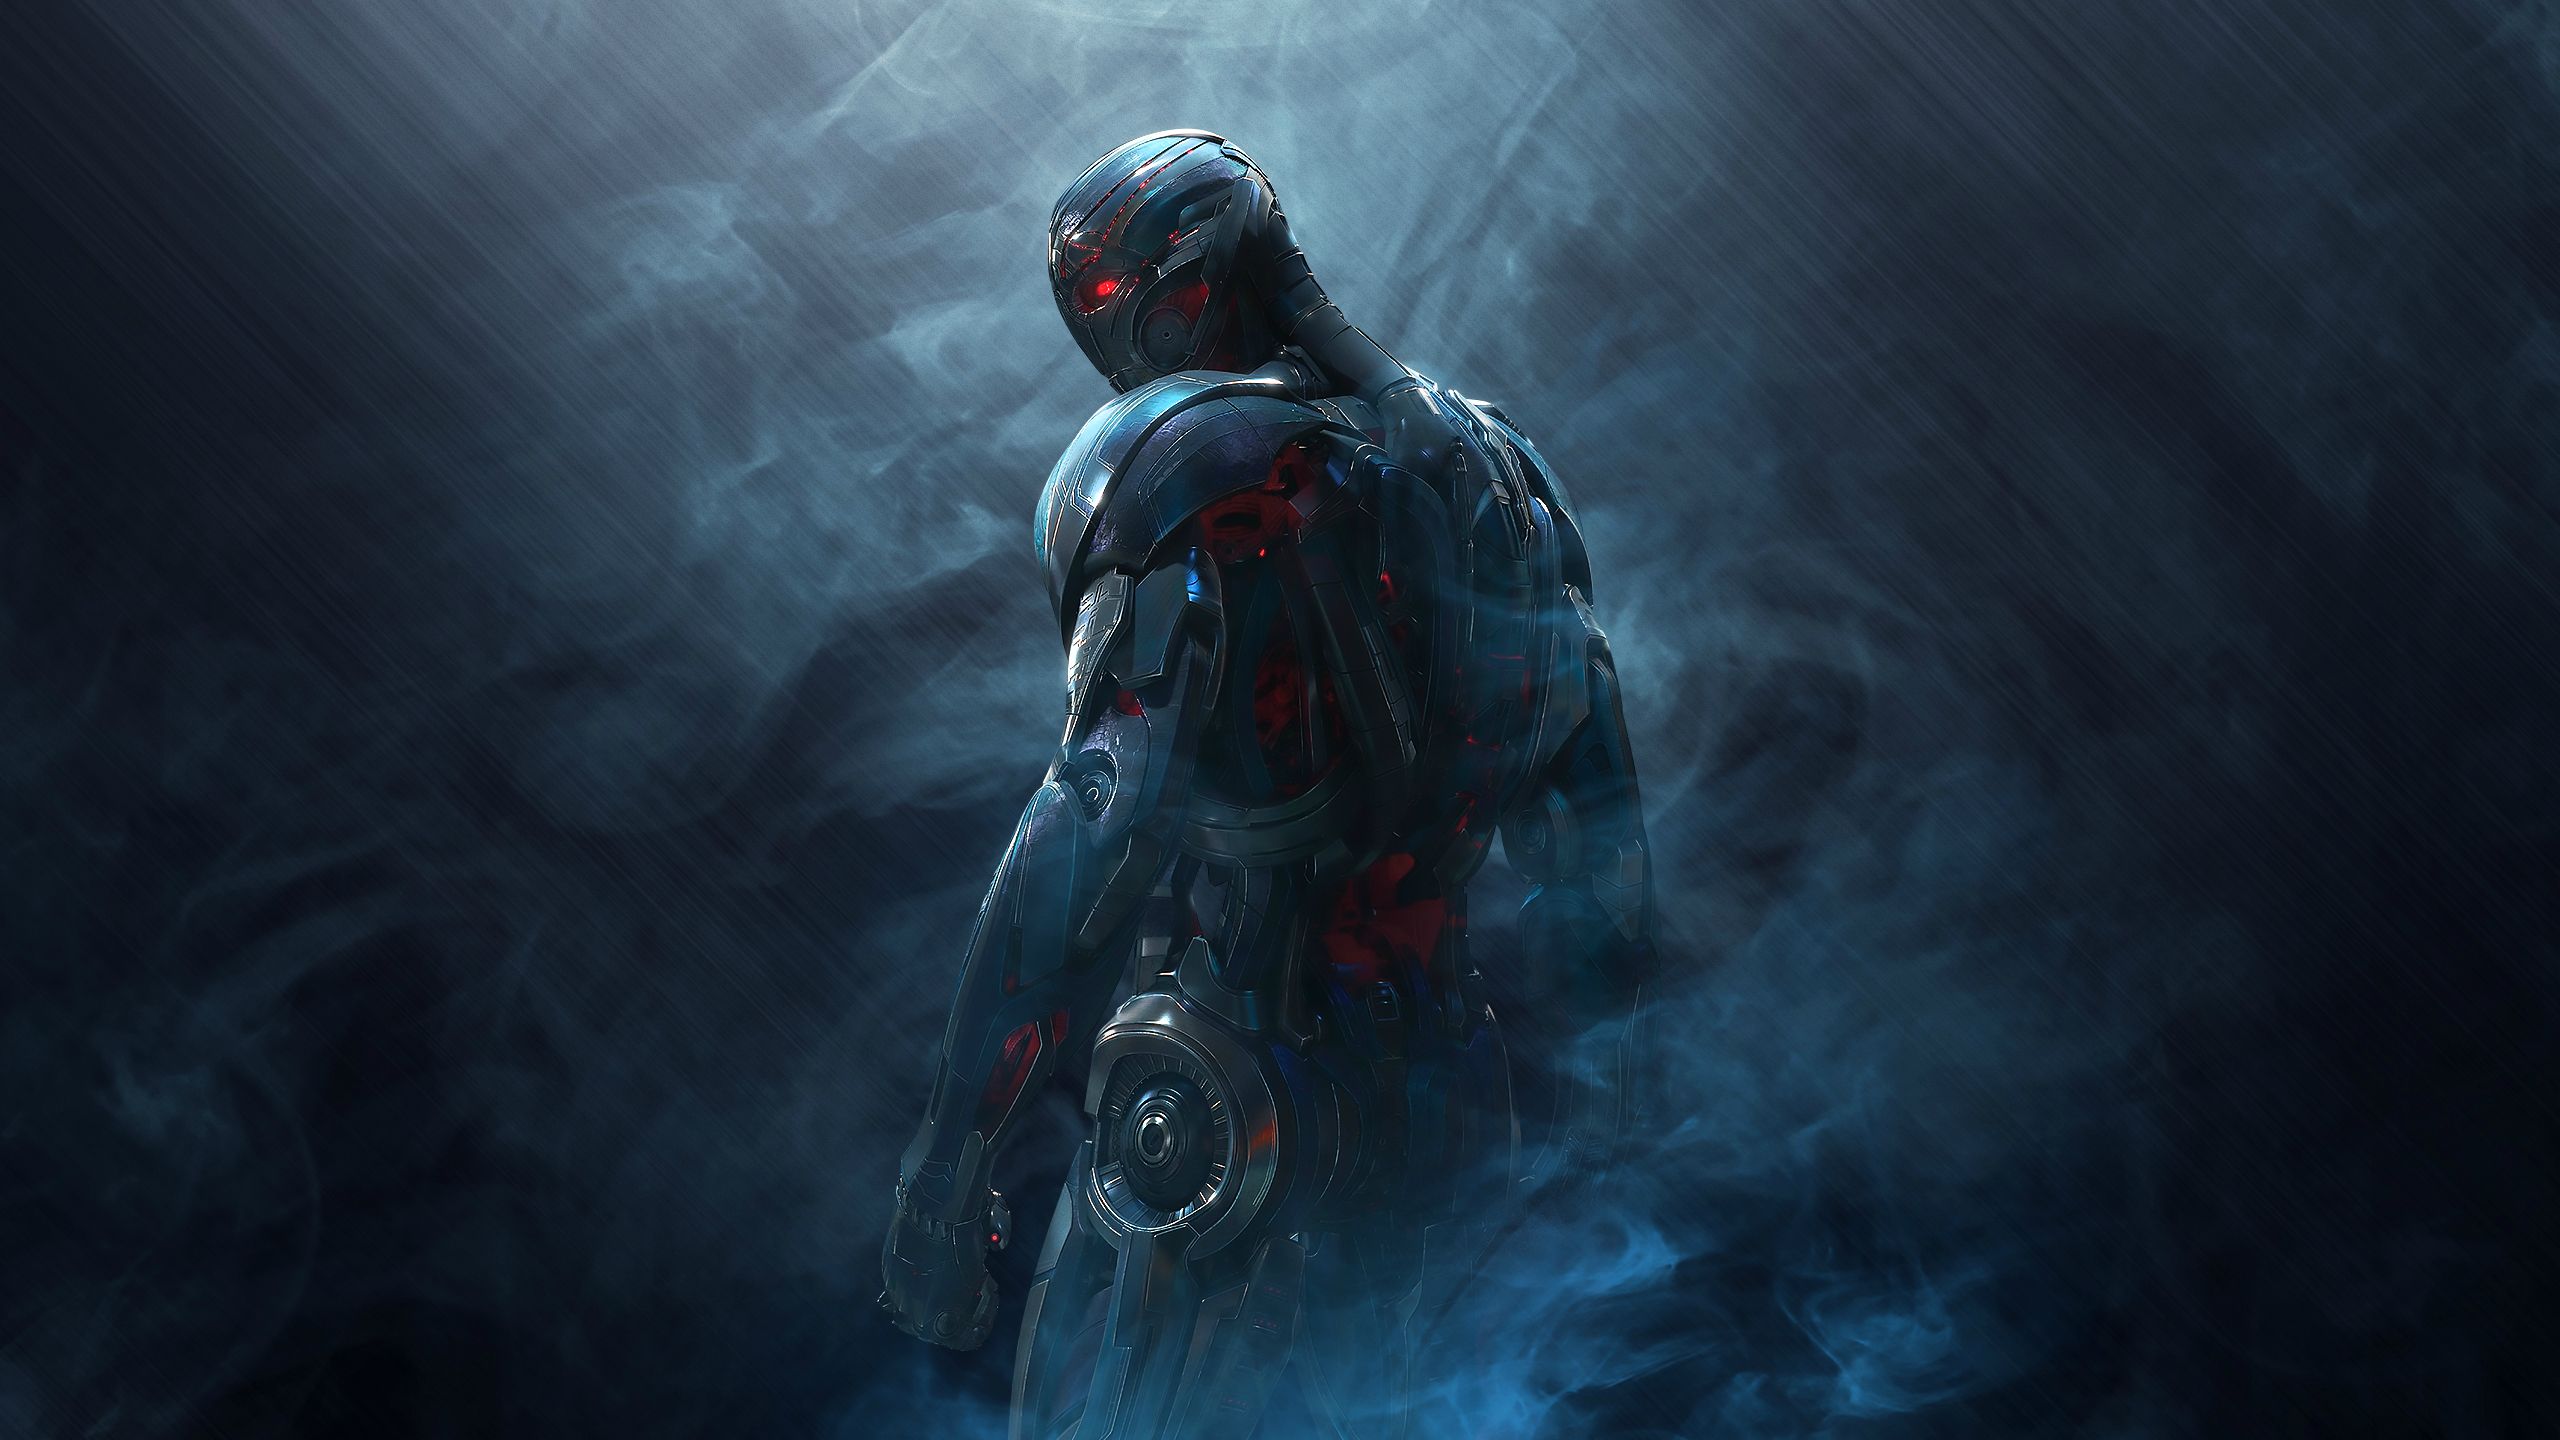 smoke, ultron, avengers: age of ultron, movie, robot, the avengers phone background